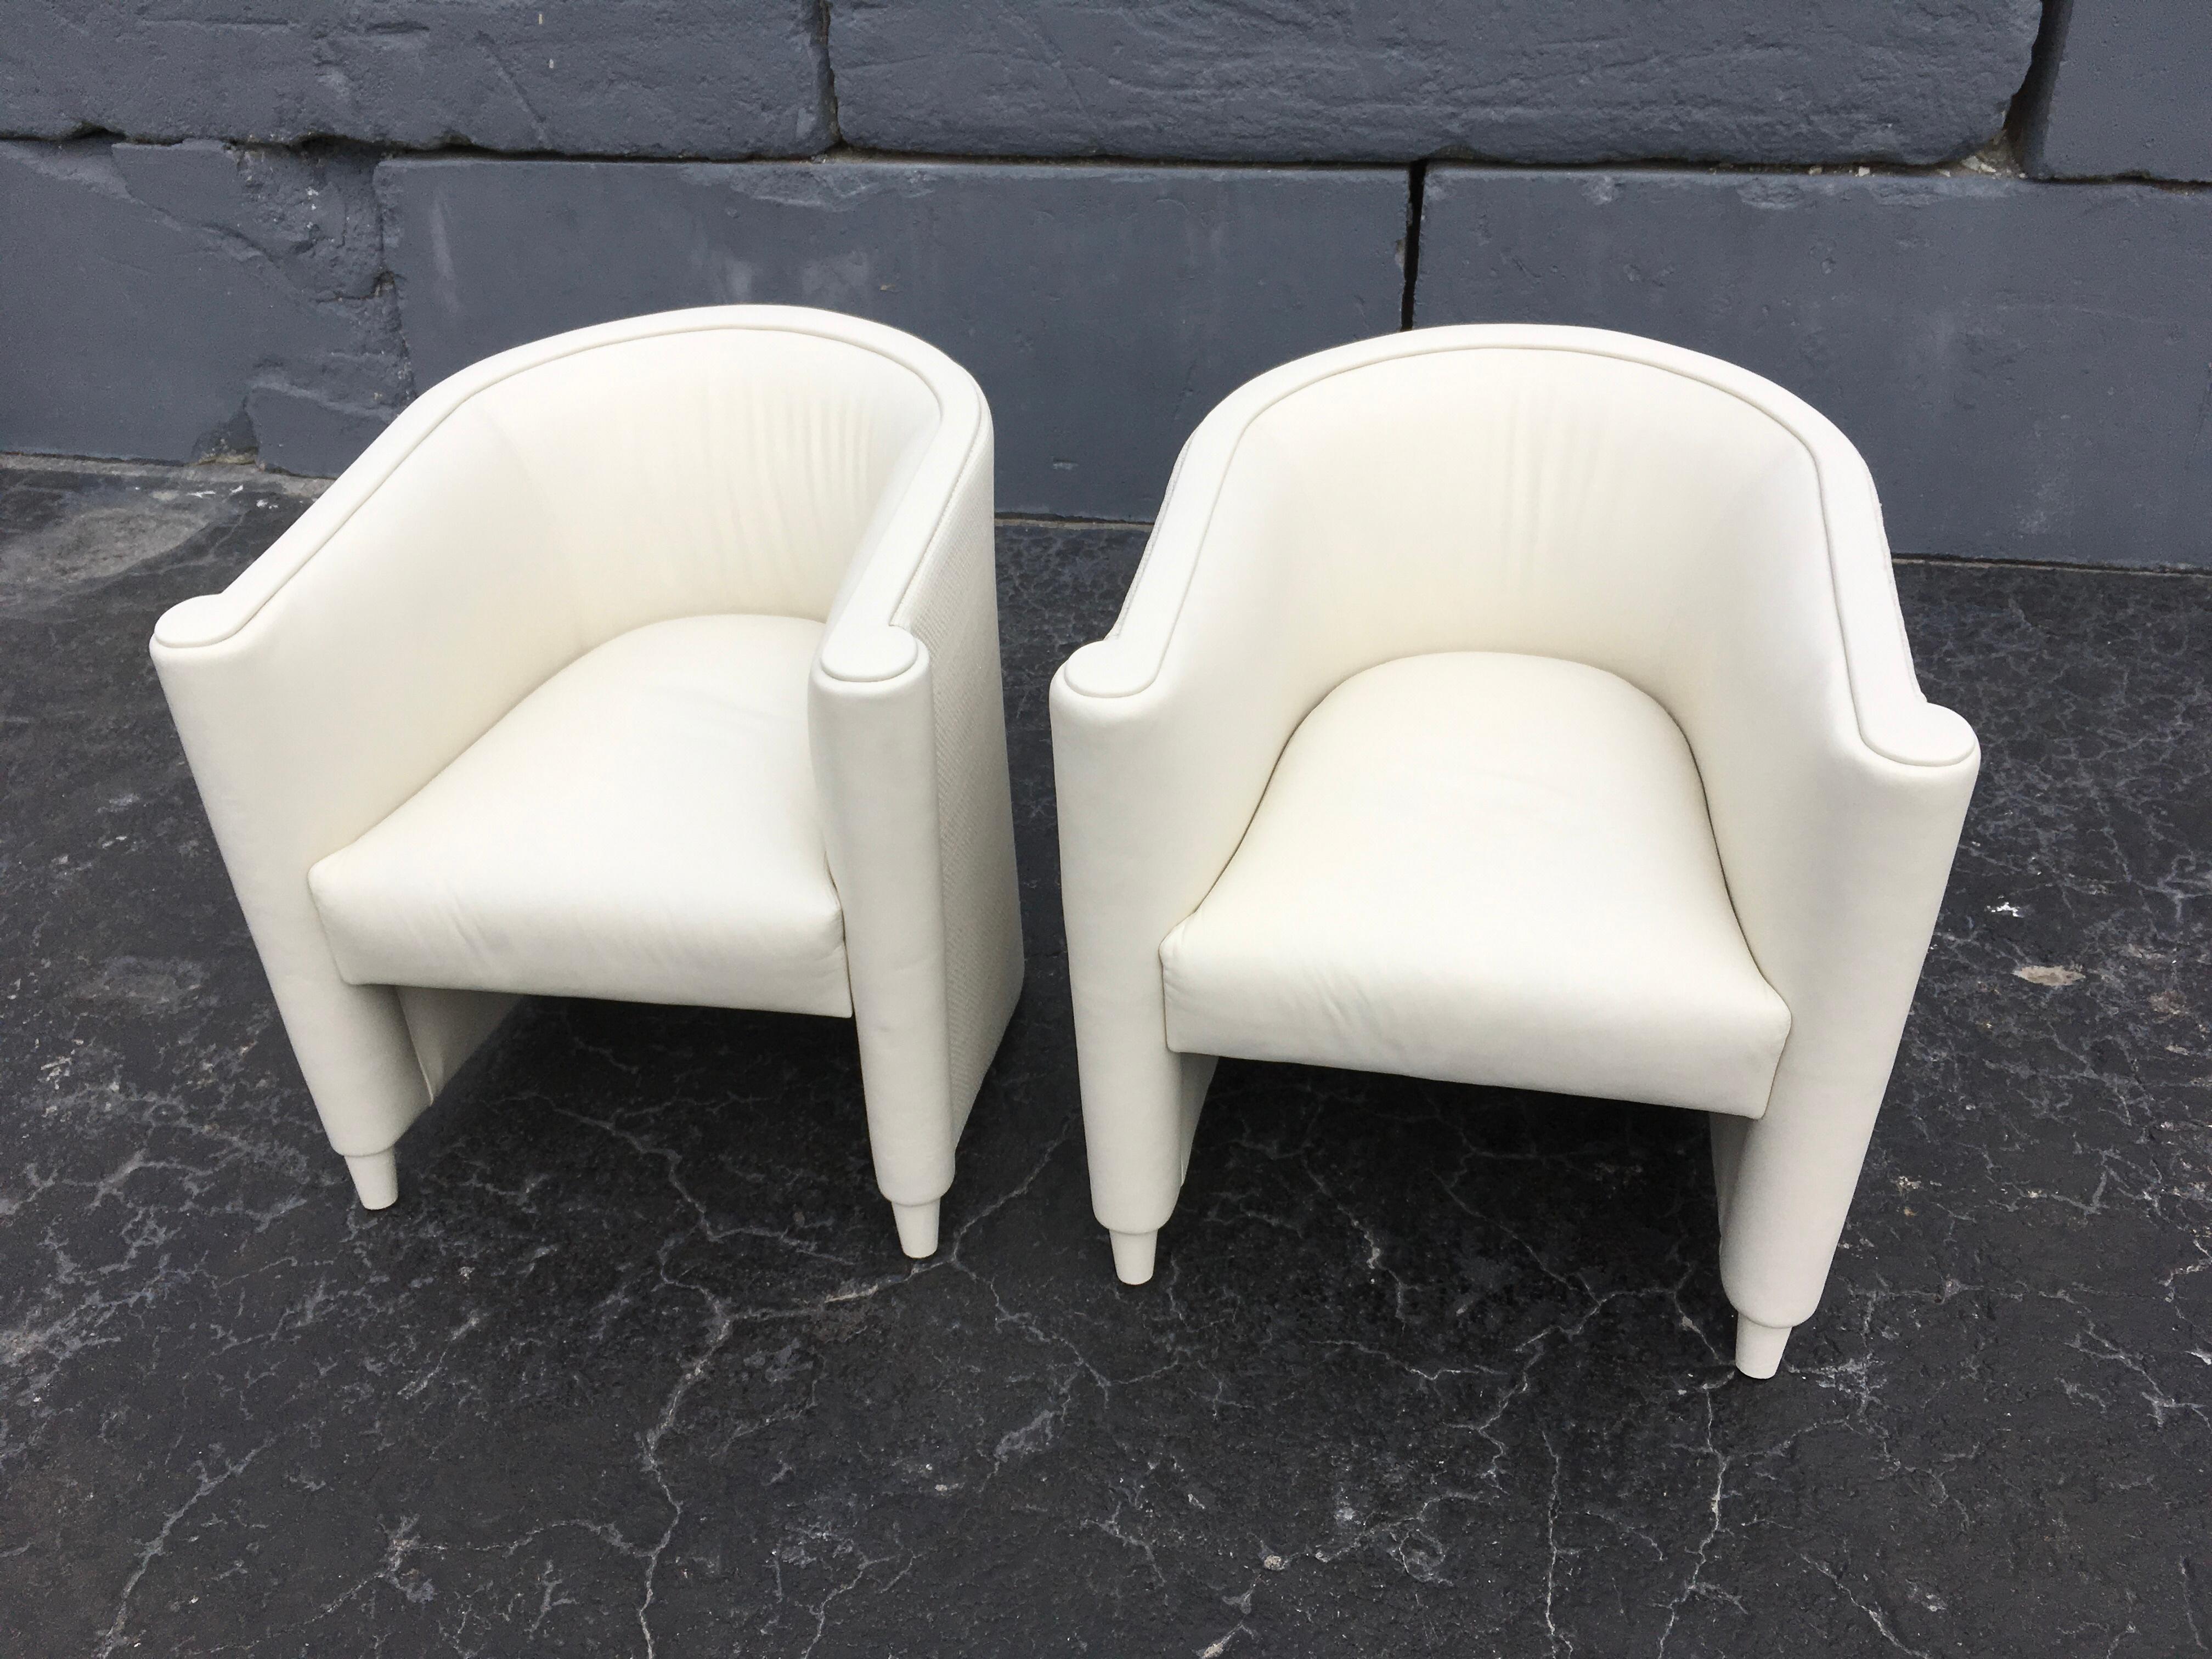 Pair of Leather Lounge Chairs, Art Deco Style, Cream Color 10